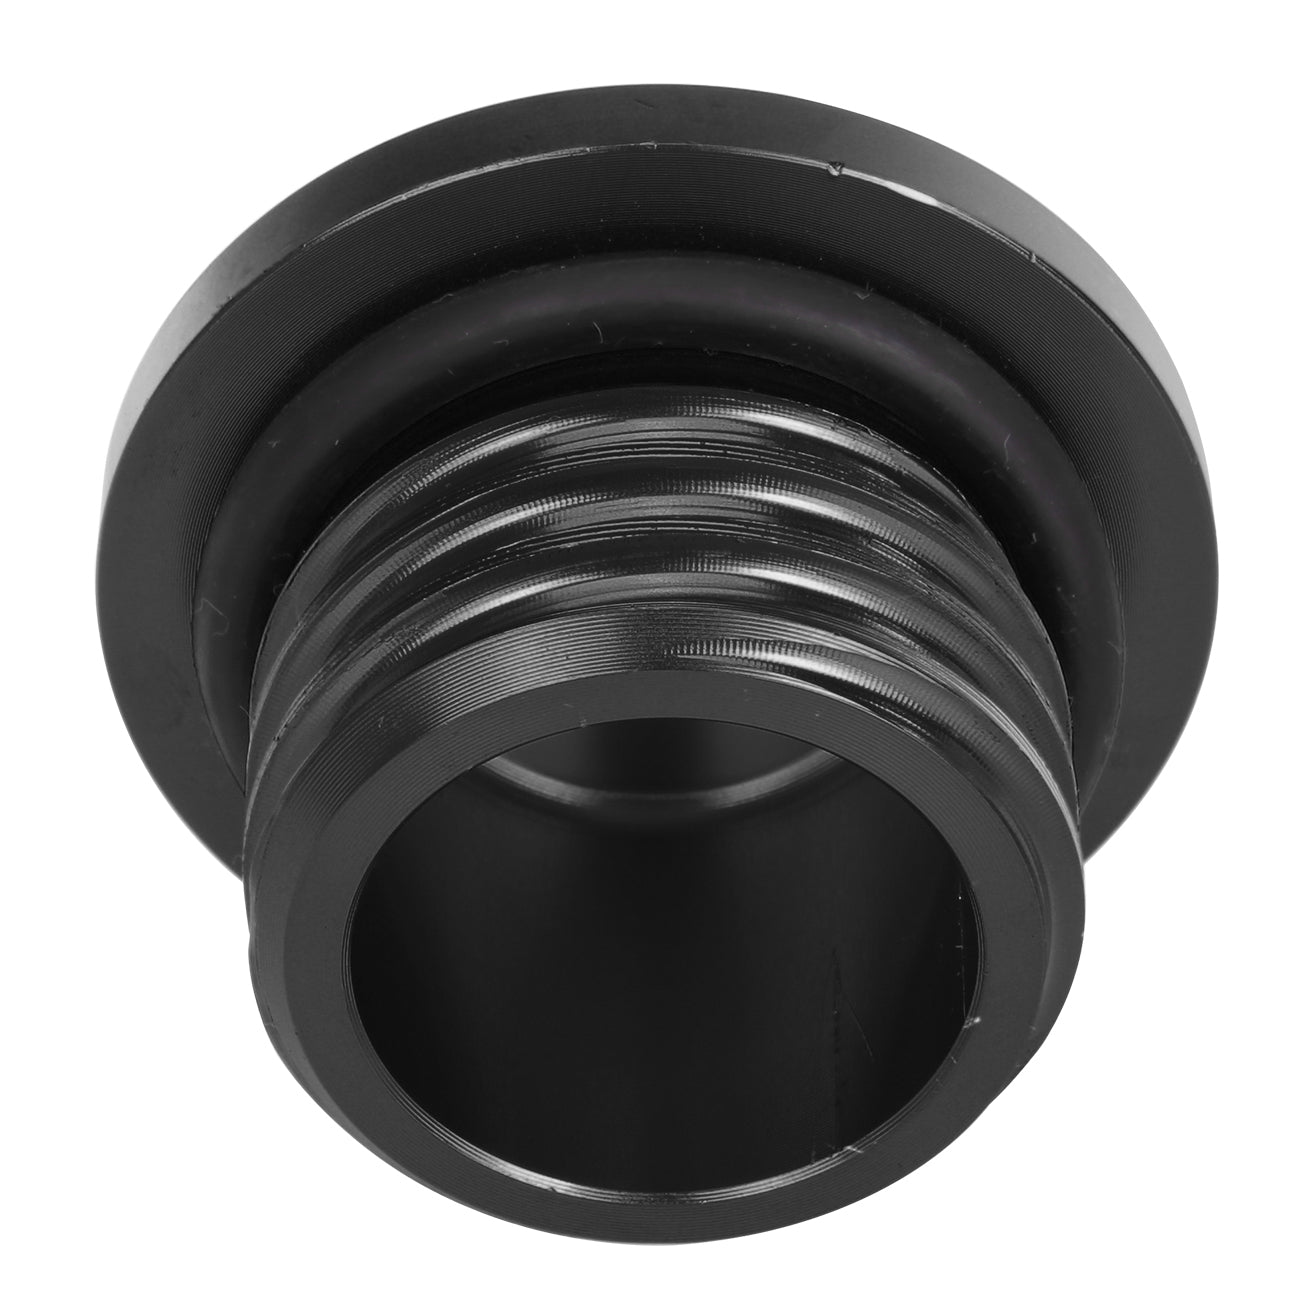 Aluminum Metal Fuel Gas Tank Oil Cap Cover Fit for Motorcycle 1996-UP Black